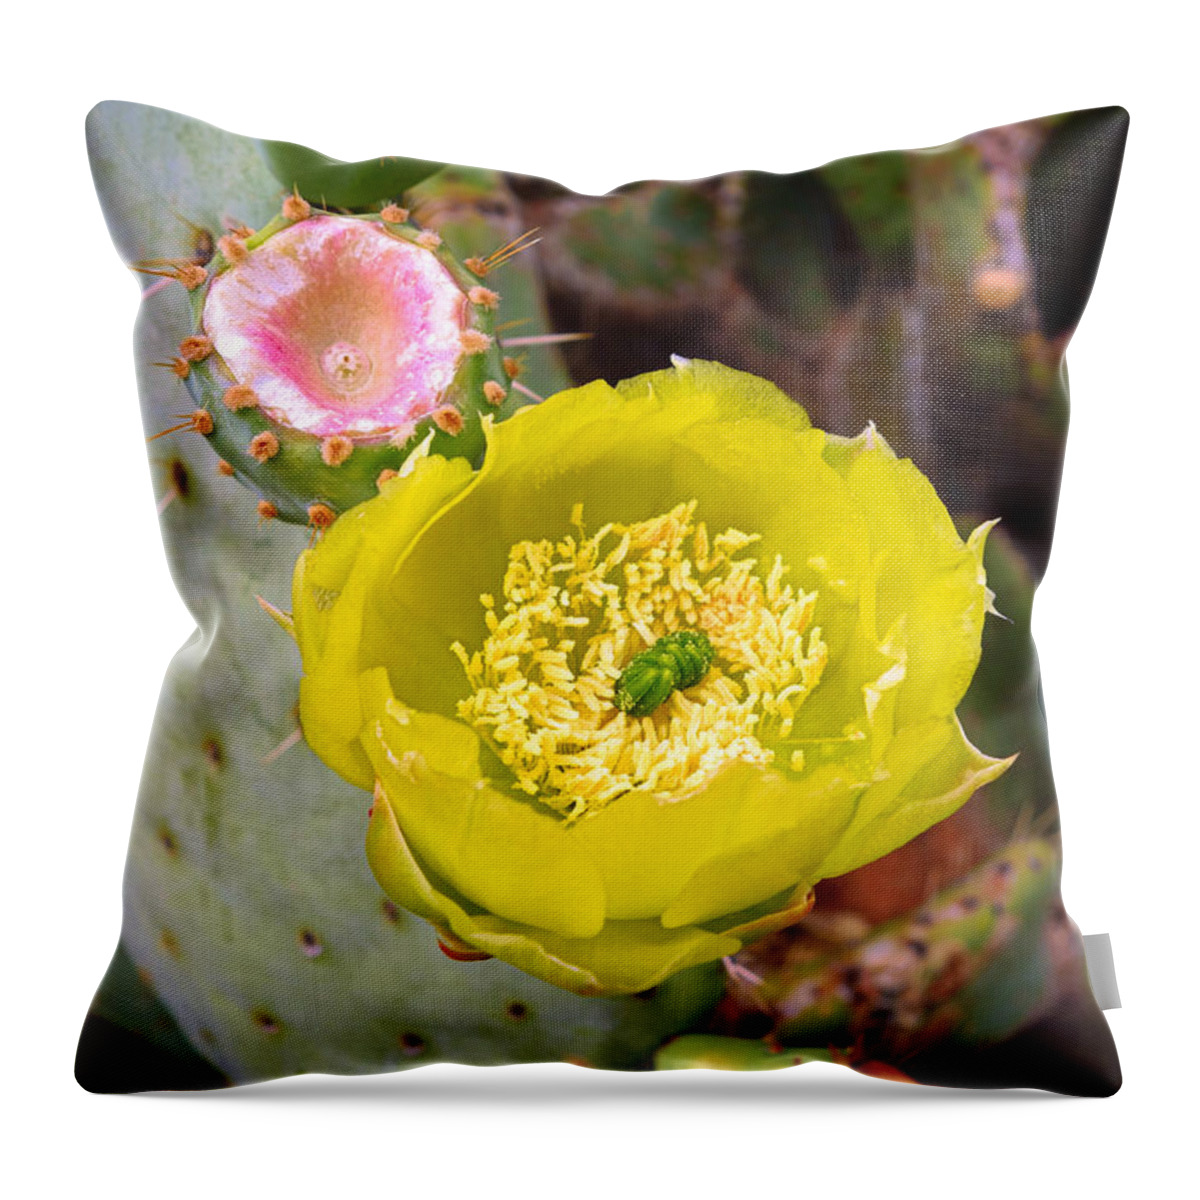 Prickly Pear Throw Pillow featuring the photograph Prickly Pear Flower and Fruit by Robert Meyers-Lussier